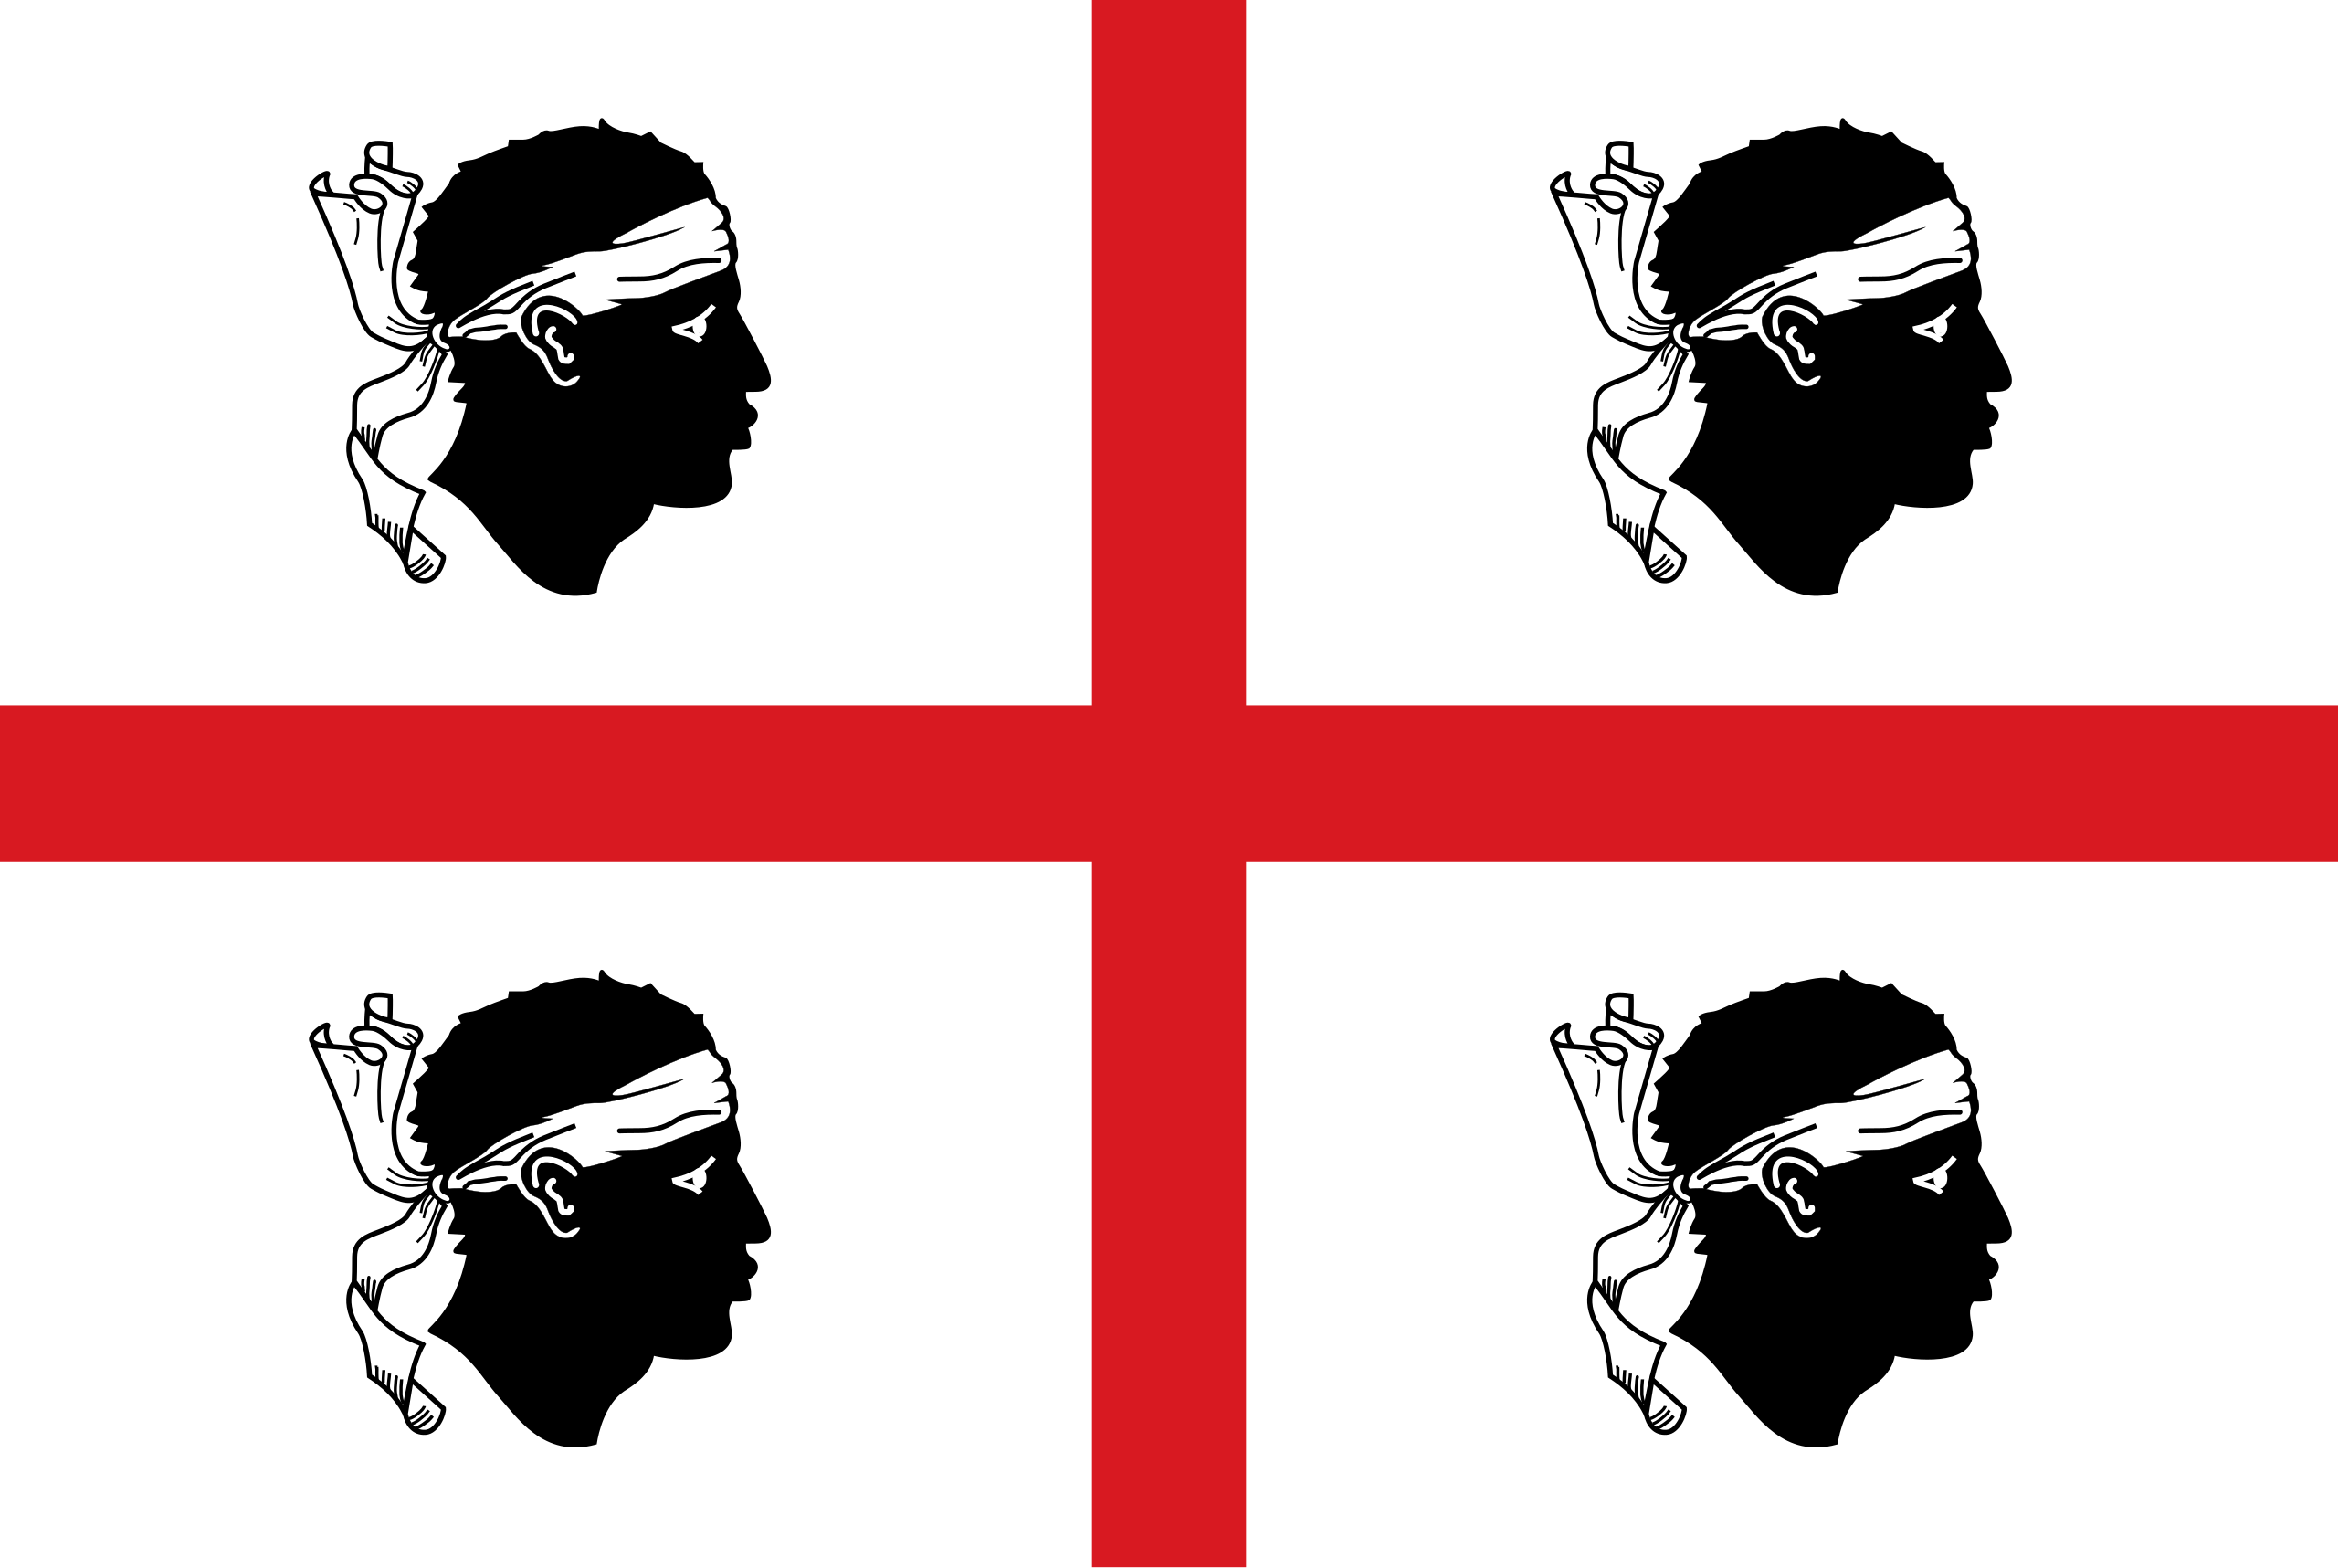 2560px-Flag_of_Sardinia%2C_Italy.svg.png